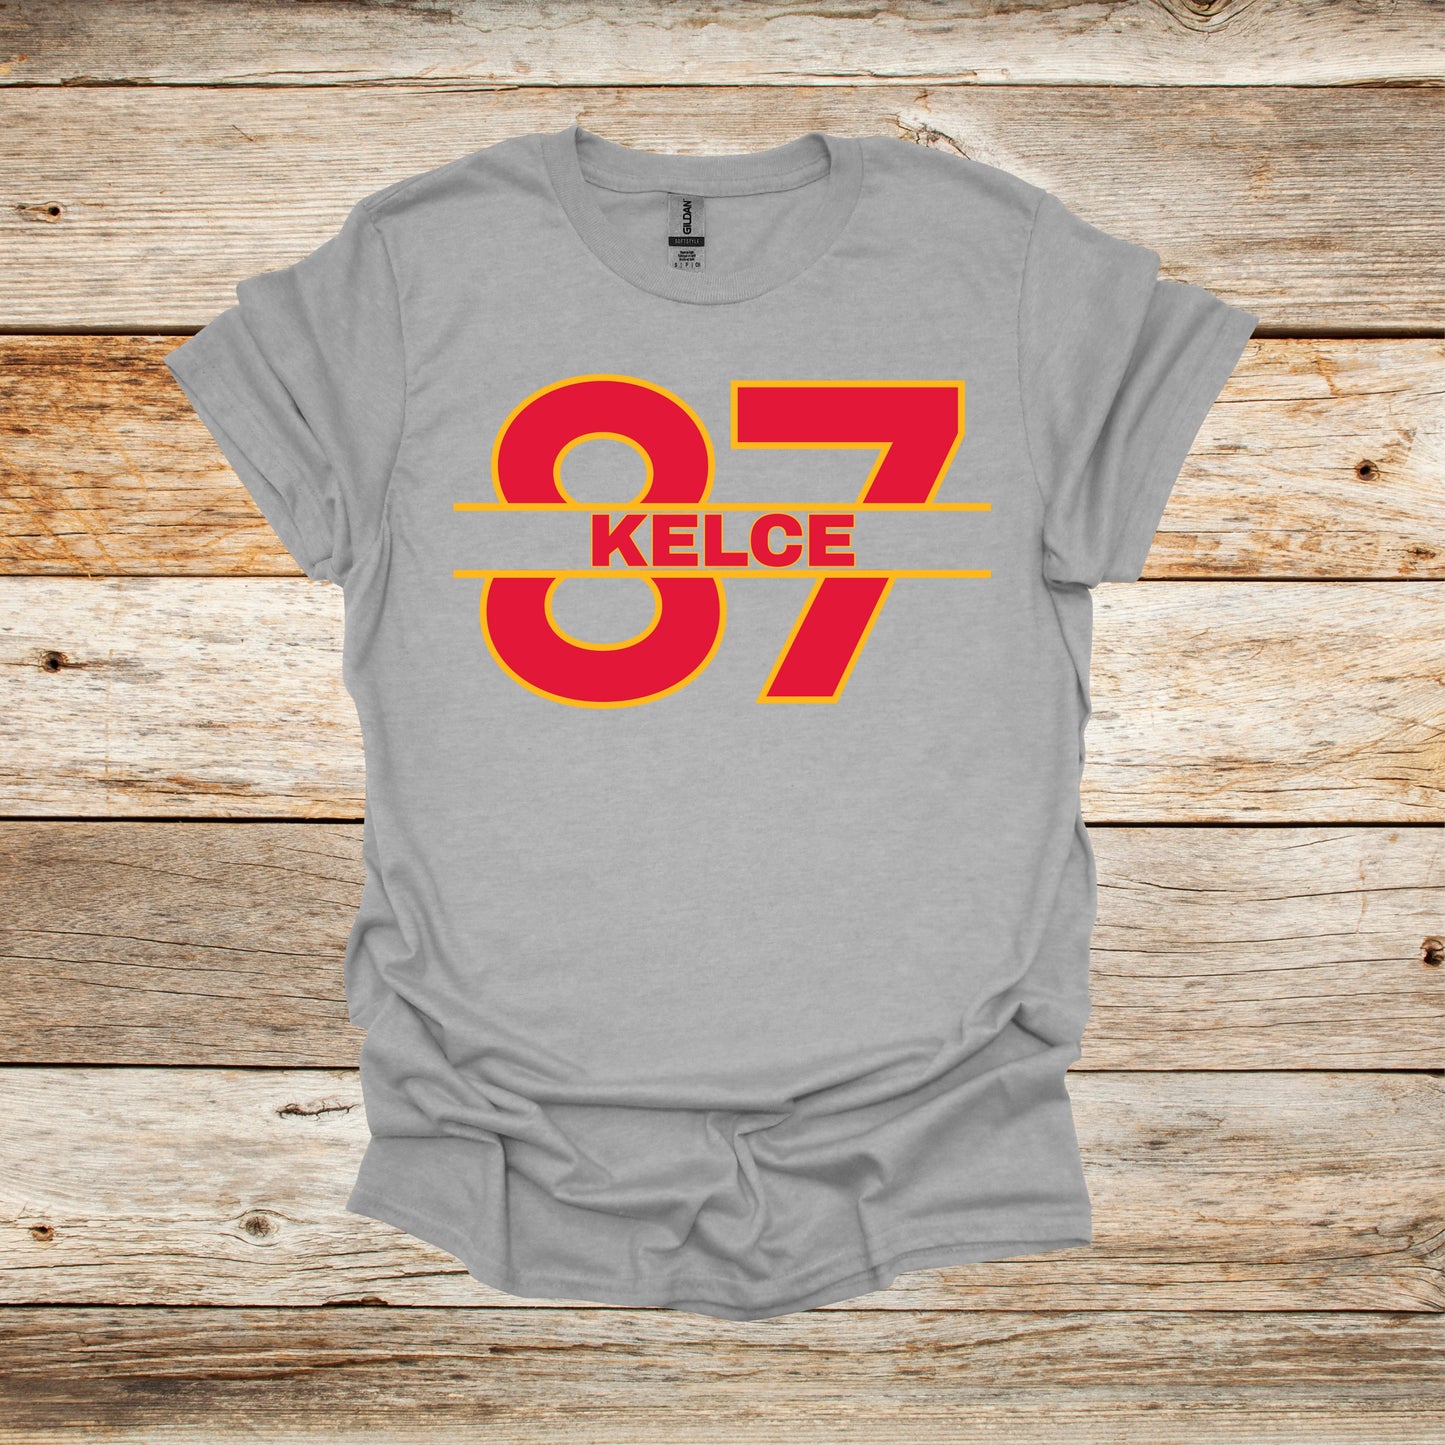 Football T-Shirt - Chiefs Football - 87 Kelce - Adult and Children's Tee Shirts - Sports T-Shirts Graphic Avenue Sport Grey Adult Small 